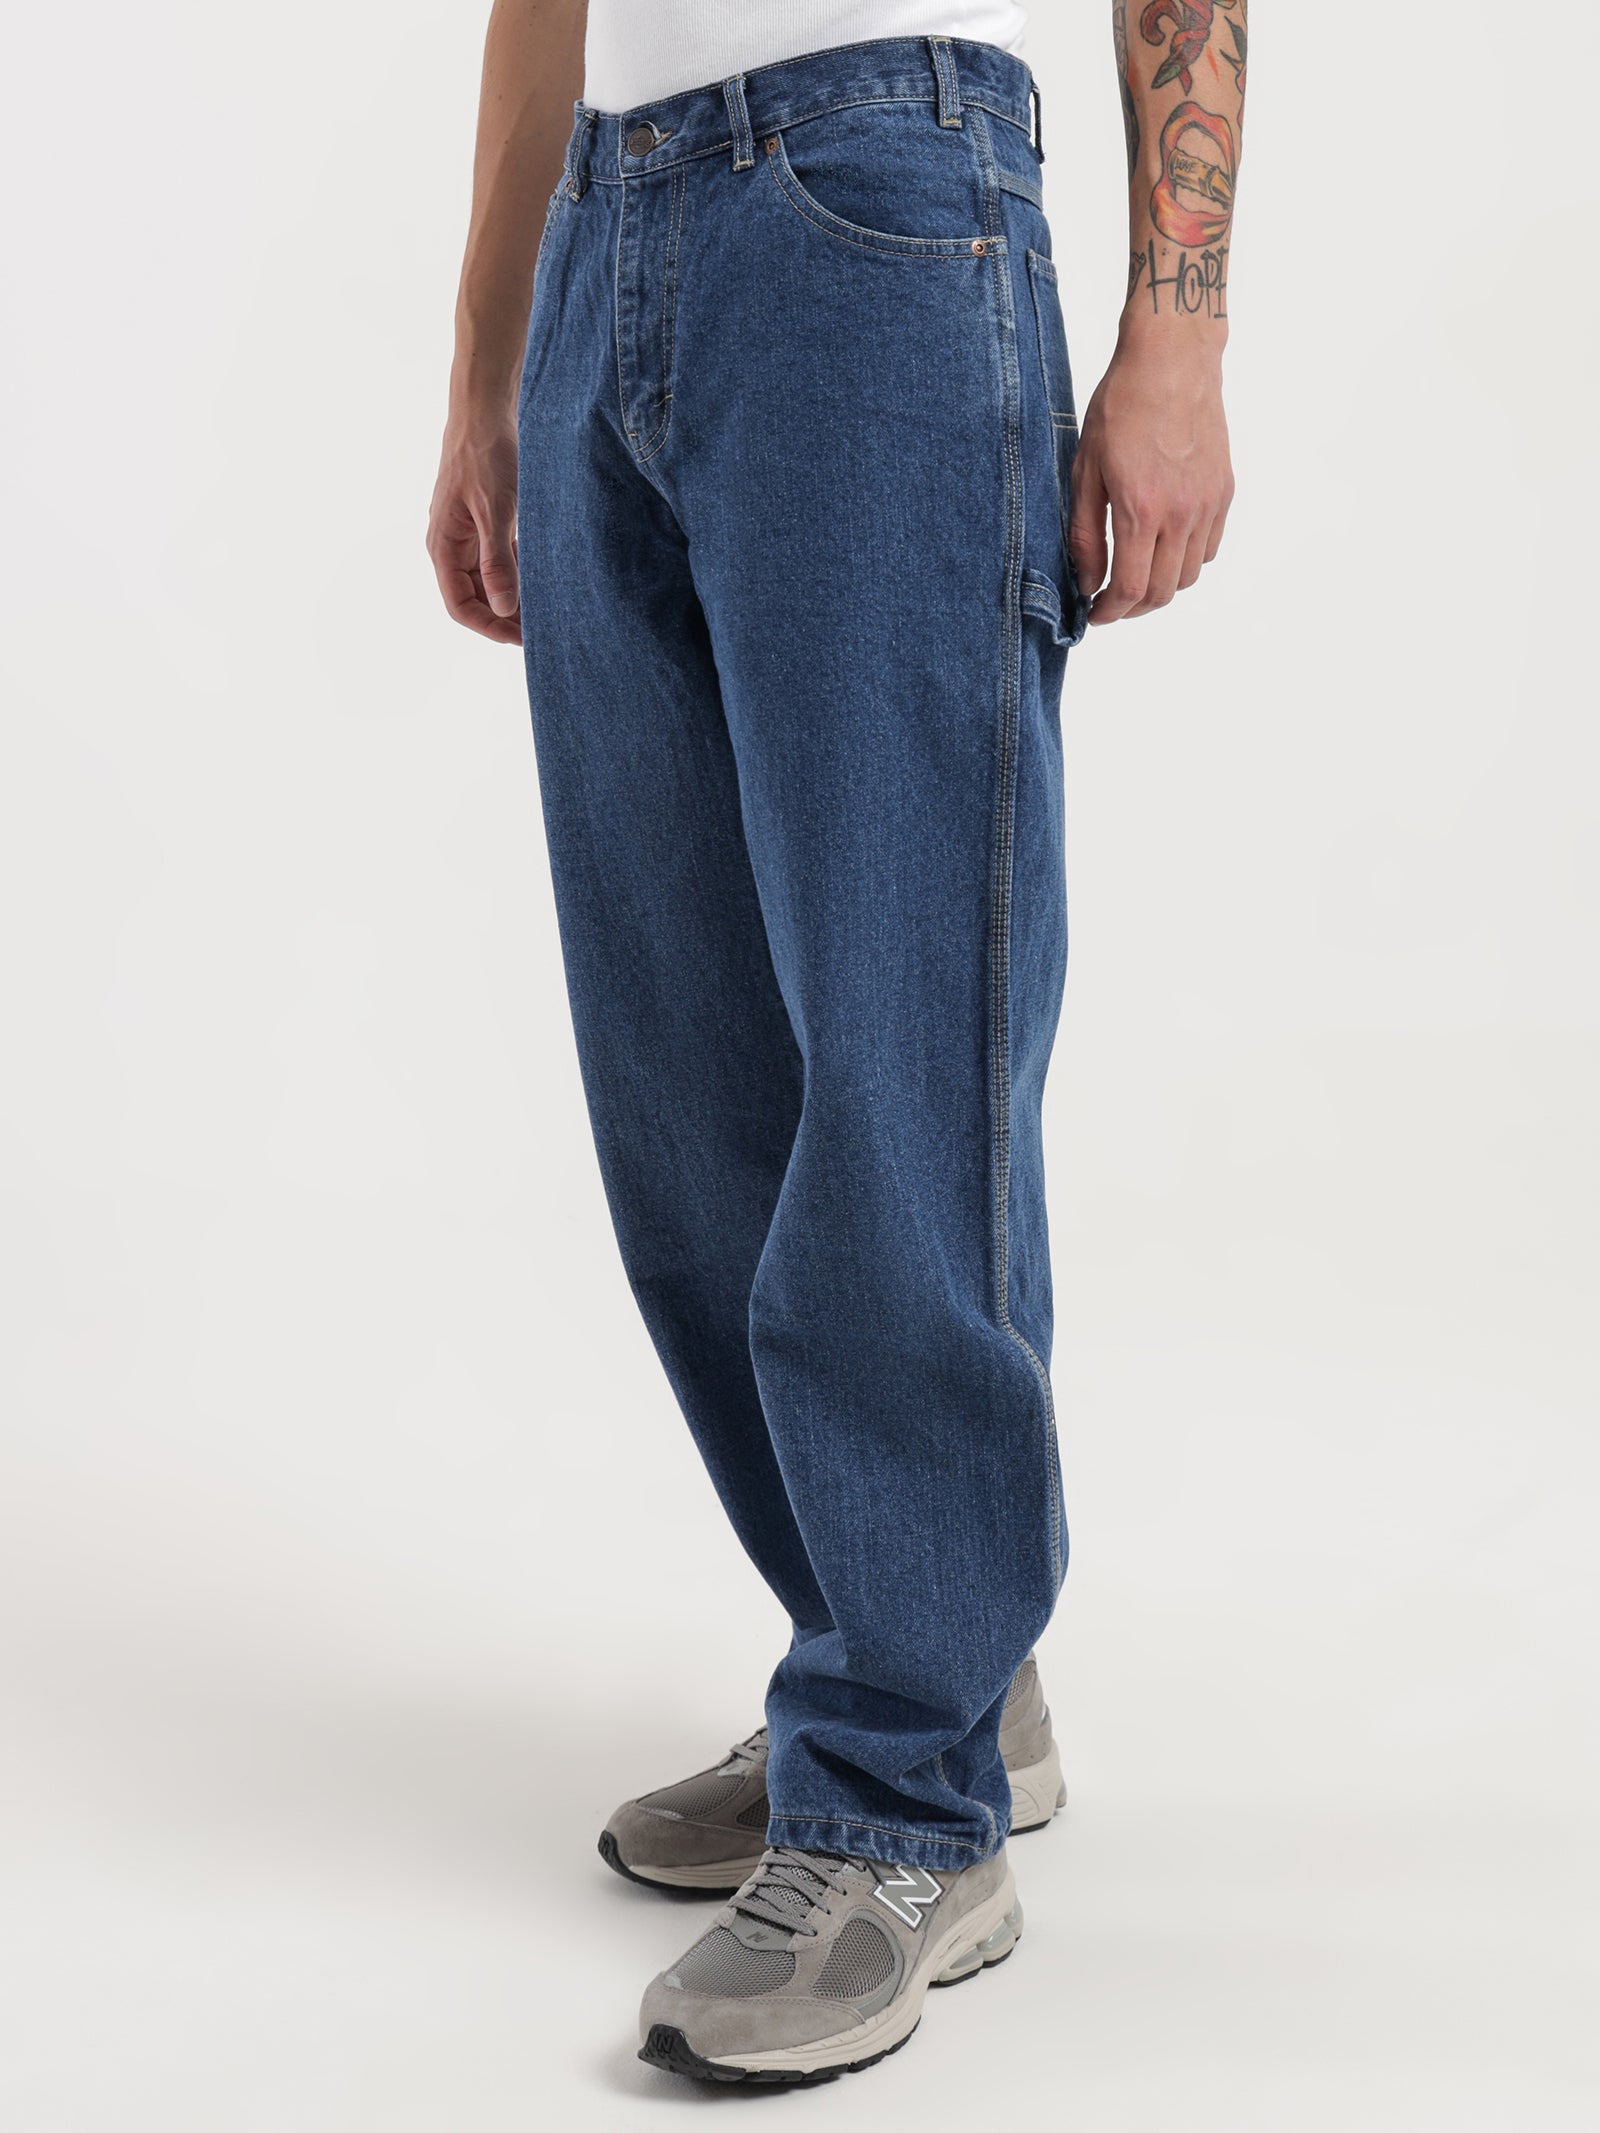 Relaxed Fit Carpenter Jeans in Stone Wash Indigo - Glue Store